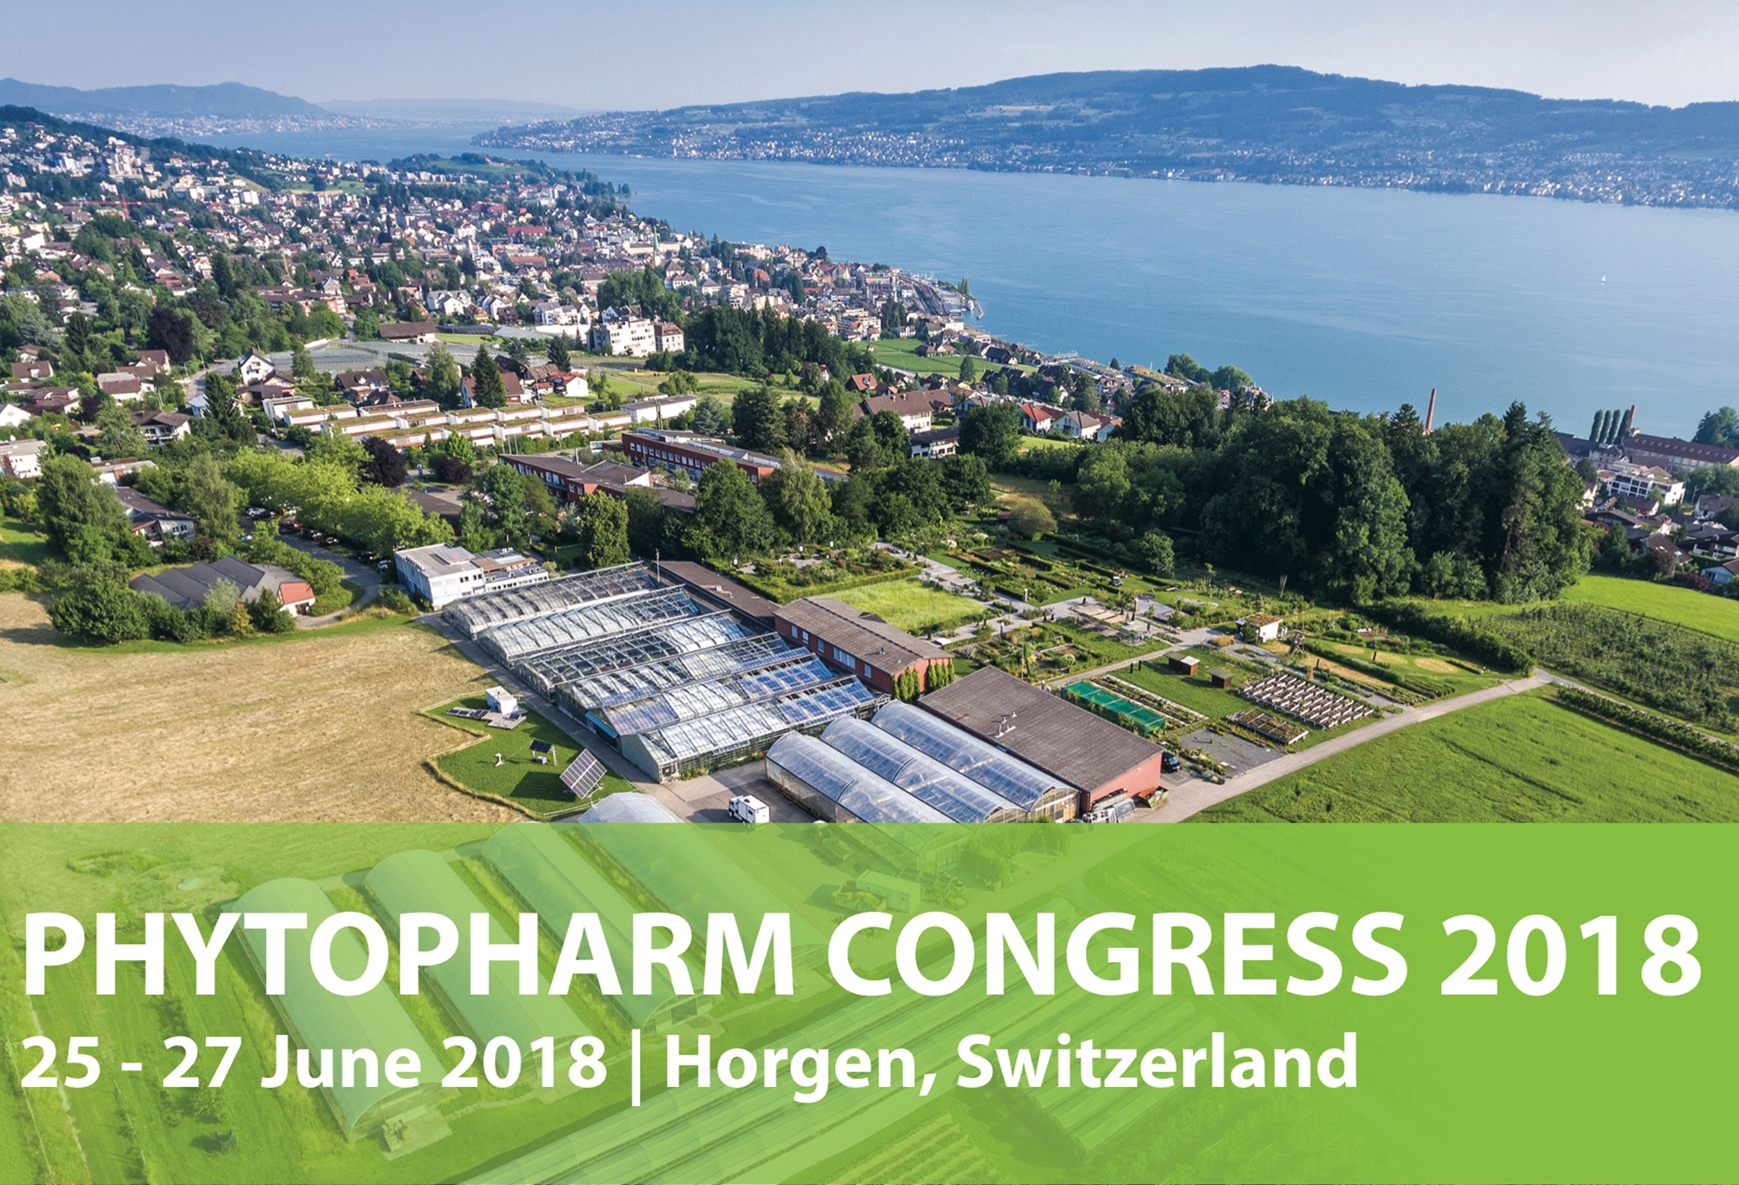 Join the Phytopharm Congress in Switzerland!